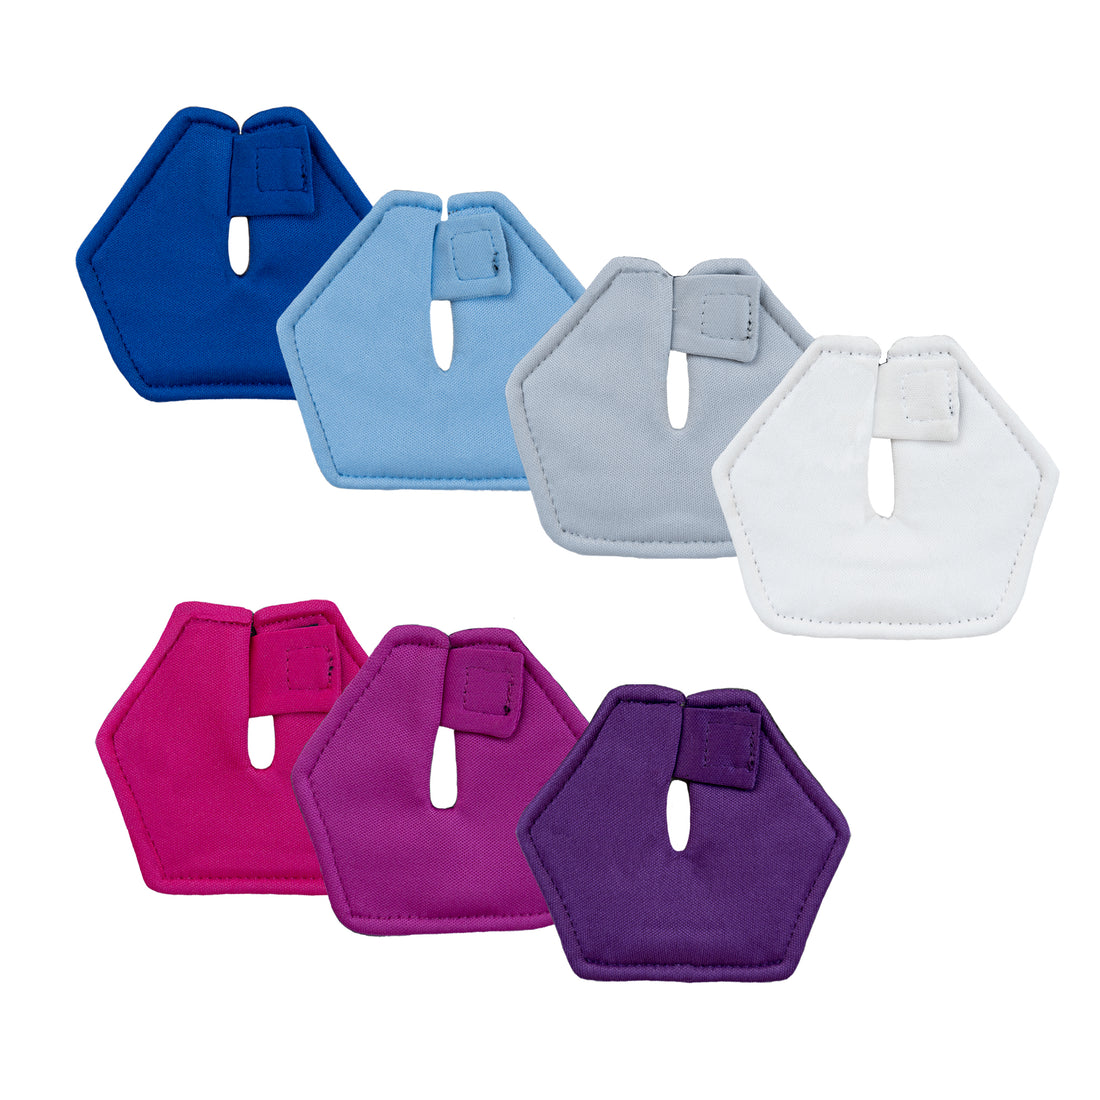 G-Tube Pads (7 day pack) Brights